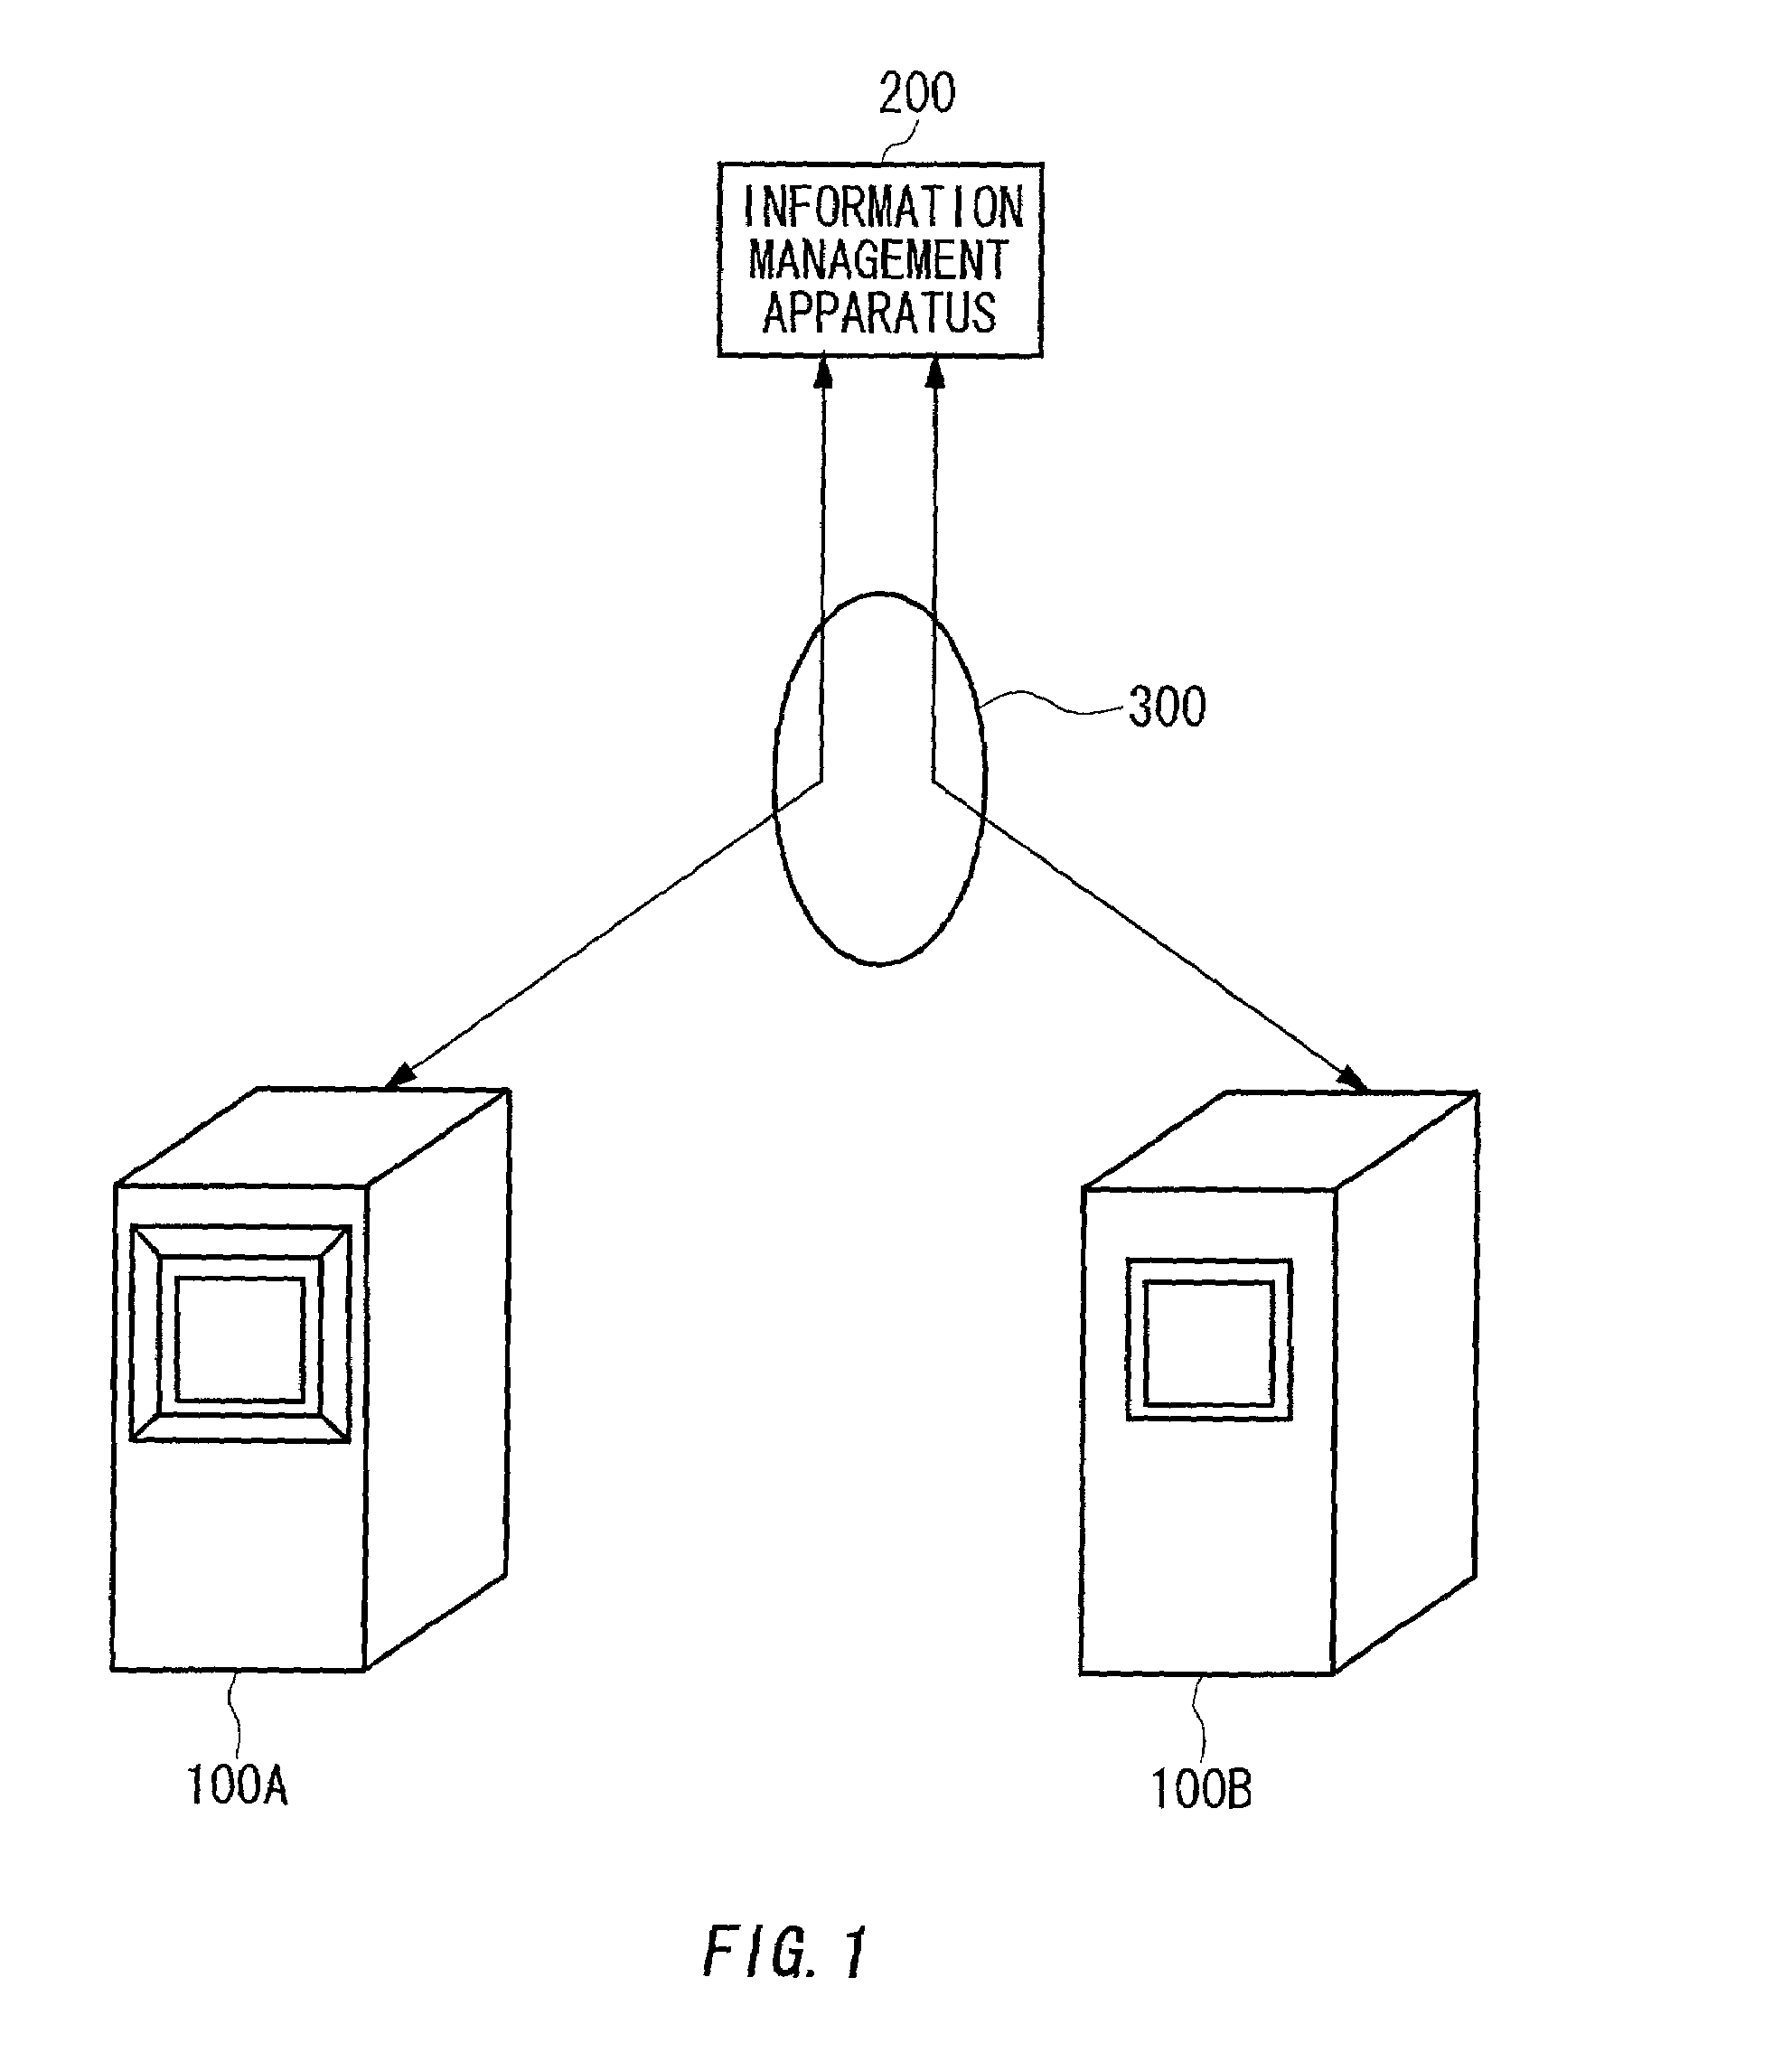 Information intermediary apparatus, information management apparatus, and information communication system